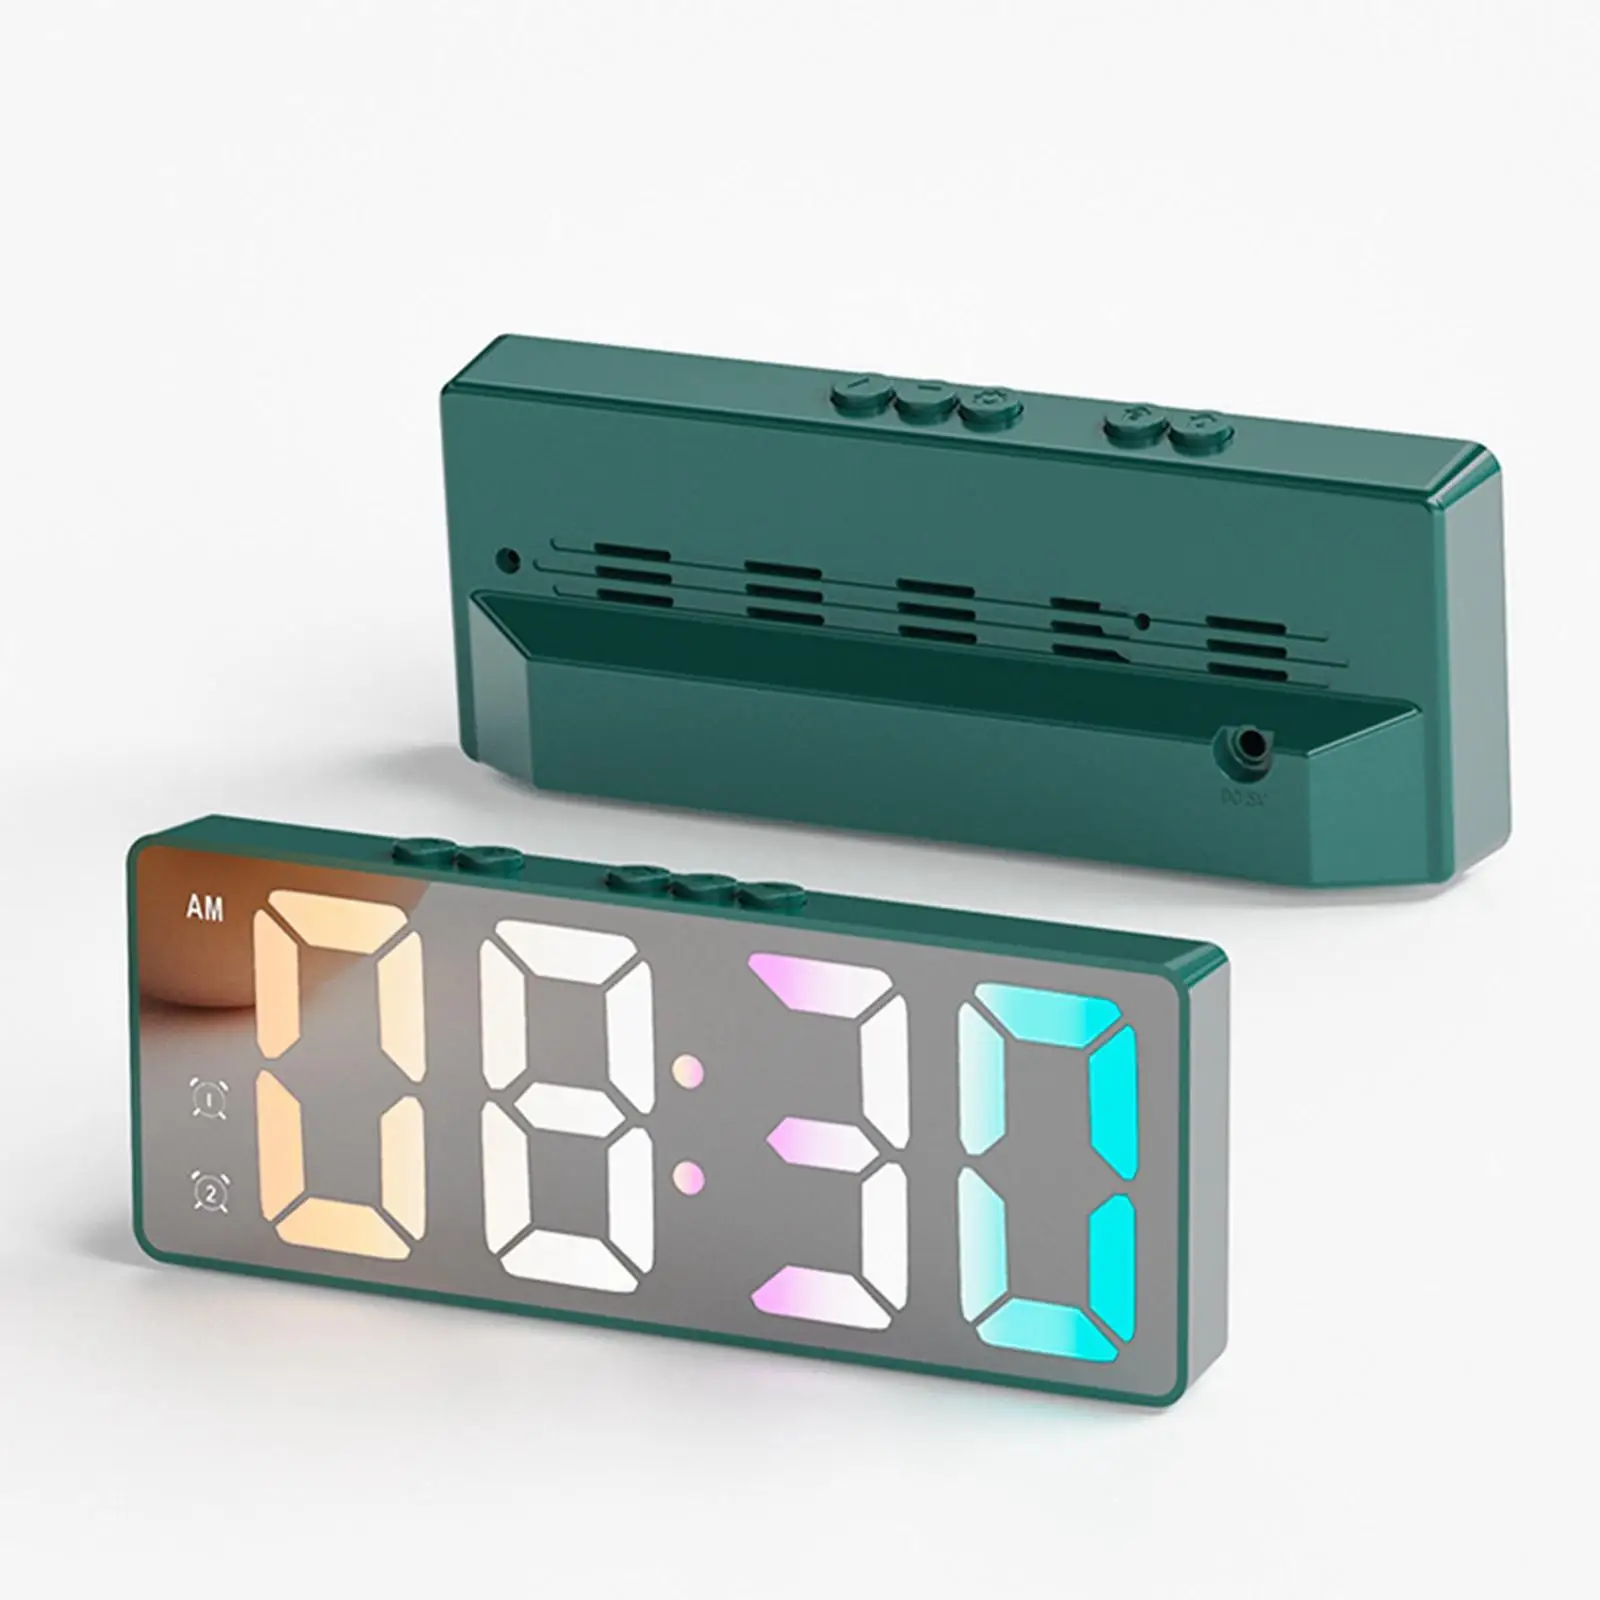 16cm Digital Alarm Clock Bedside Clock Battery Powered with Dual Alarm Temperature Display for Home Office Multifunctional